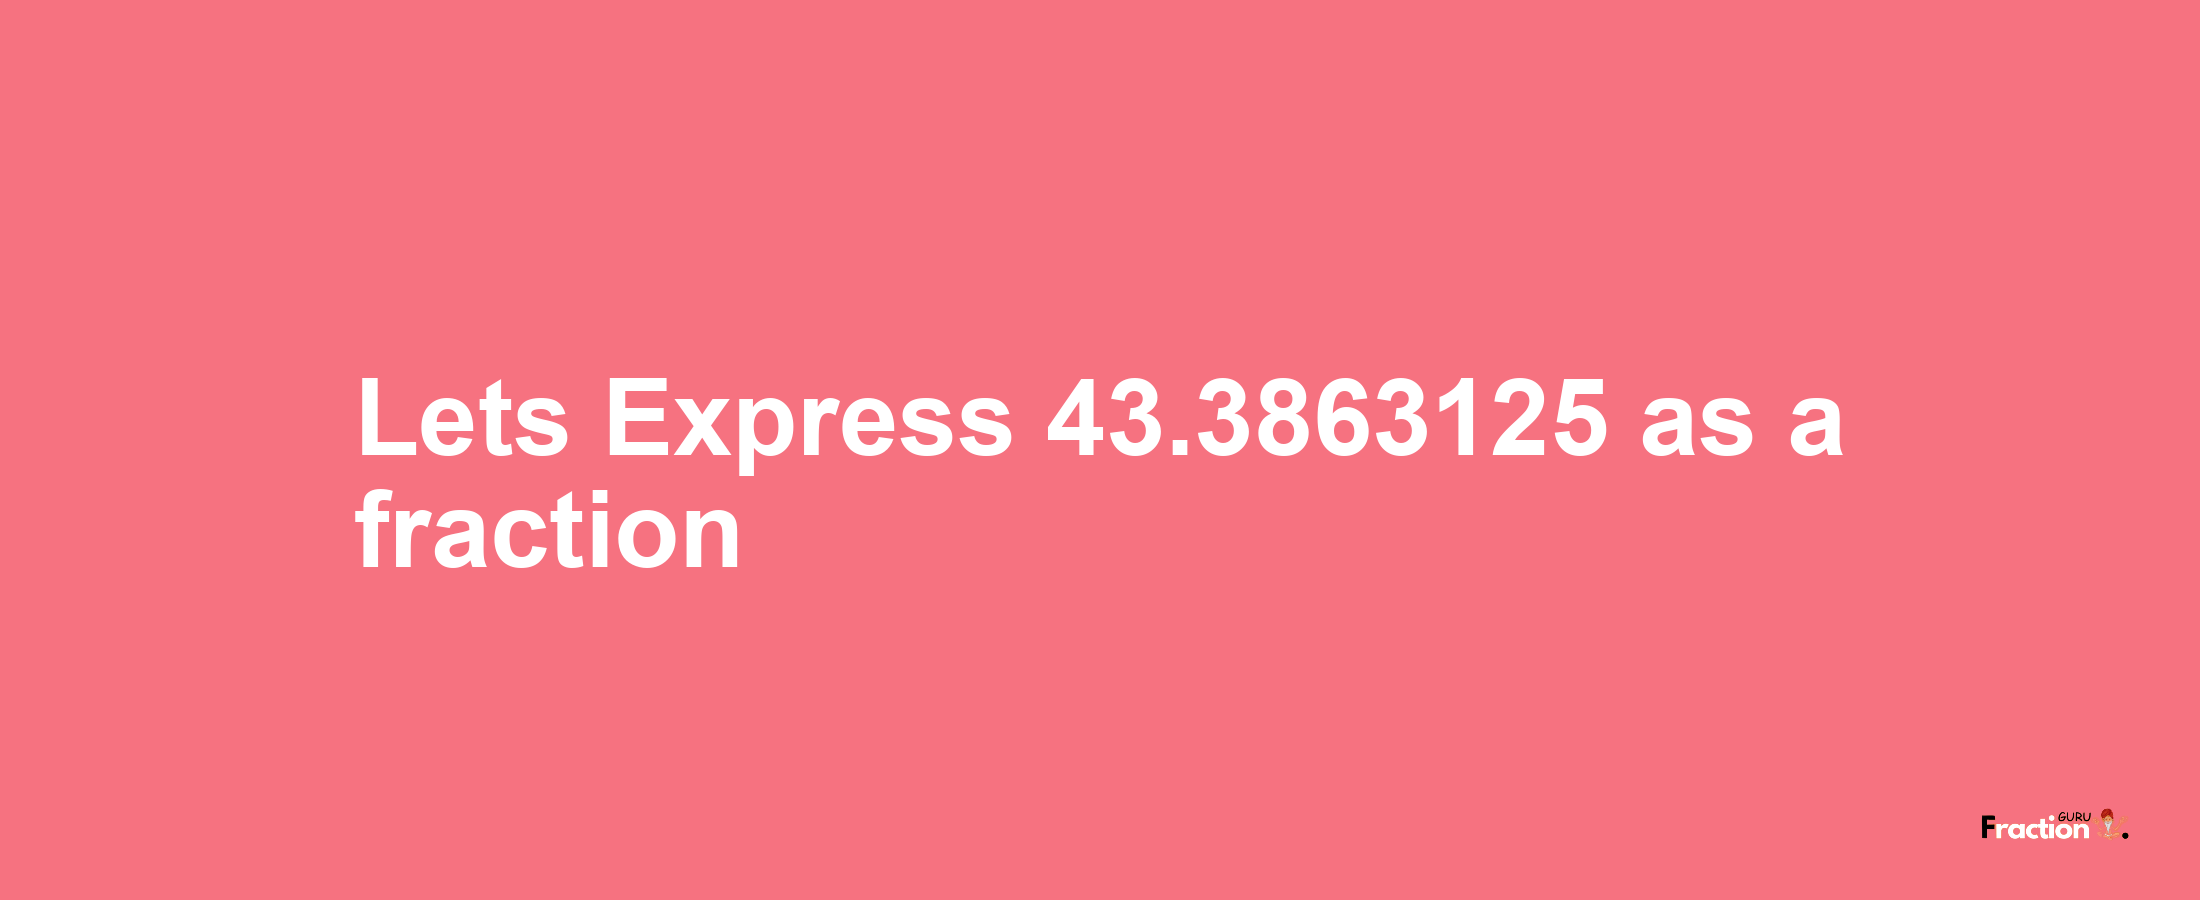 Lets Express 43.3863125 as afraction